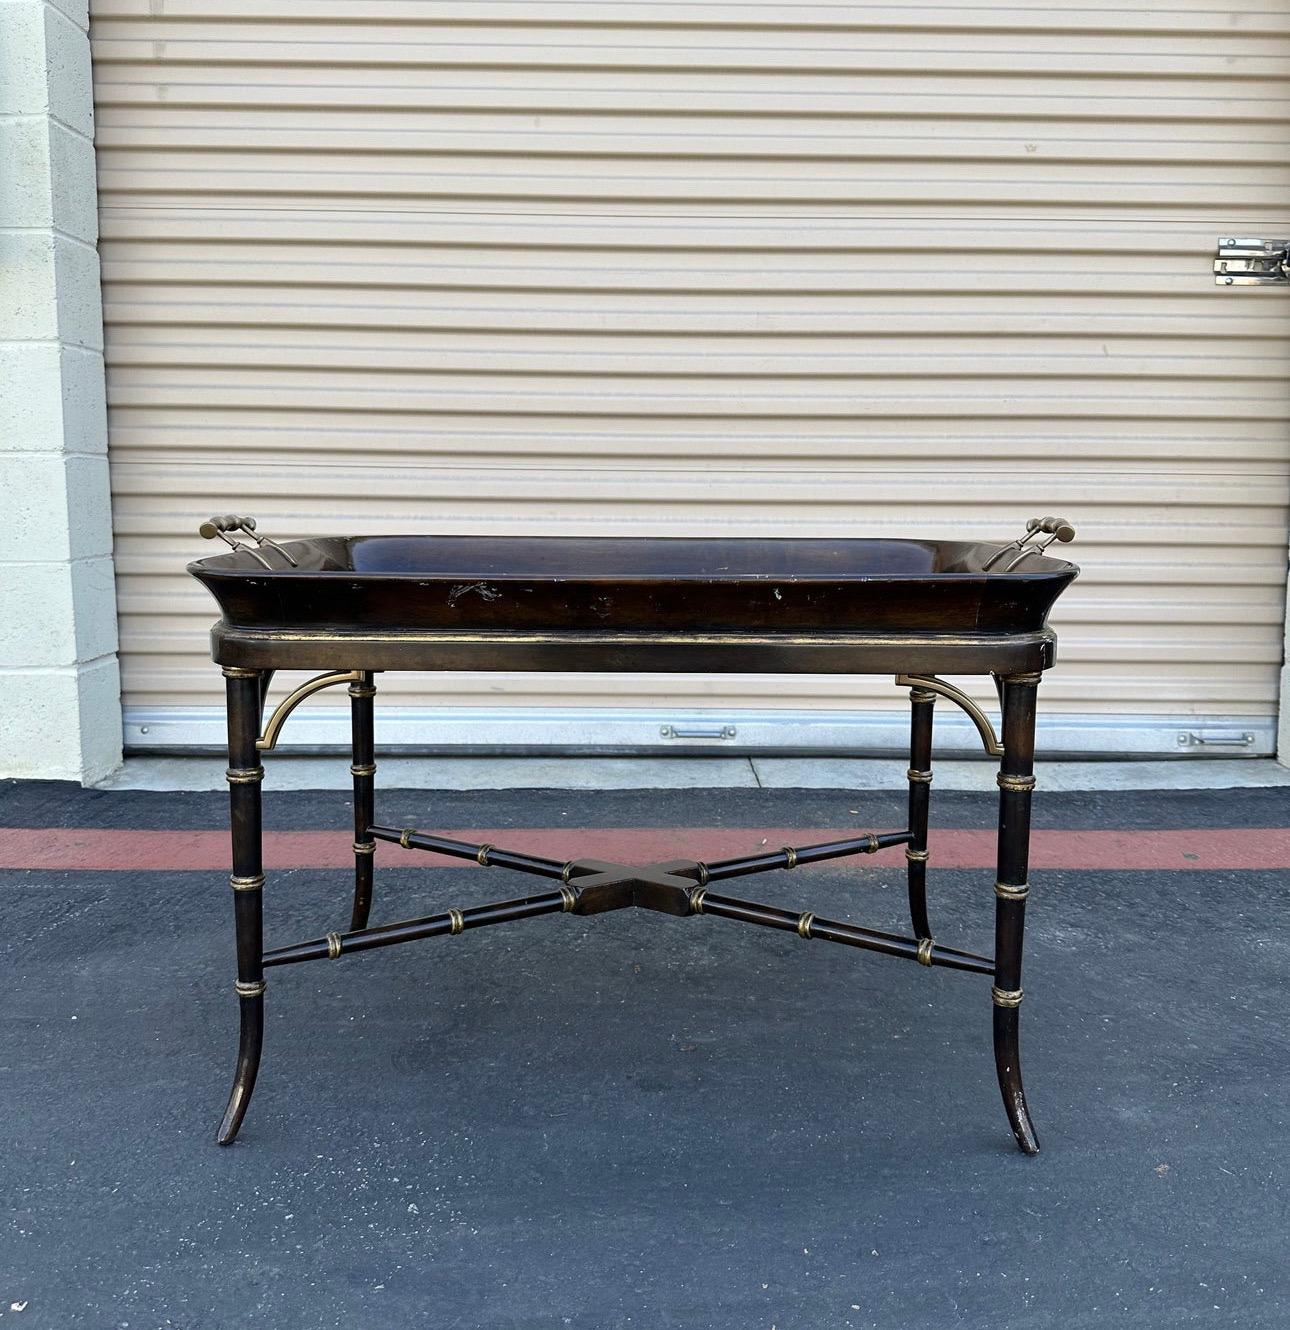 Amazing Chinoiserie Tray Top Coffee Table by Theodore Alexander. It has the label in the bottom. Painted and gilt imbuya tray table. Dish tray top and brass hardware
Beautiful turned bamboo style legs and gold gilt details. In really good condition.